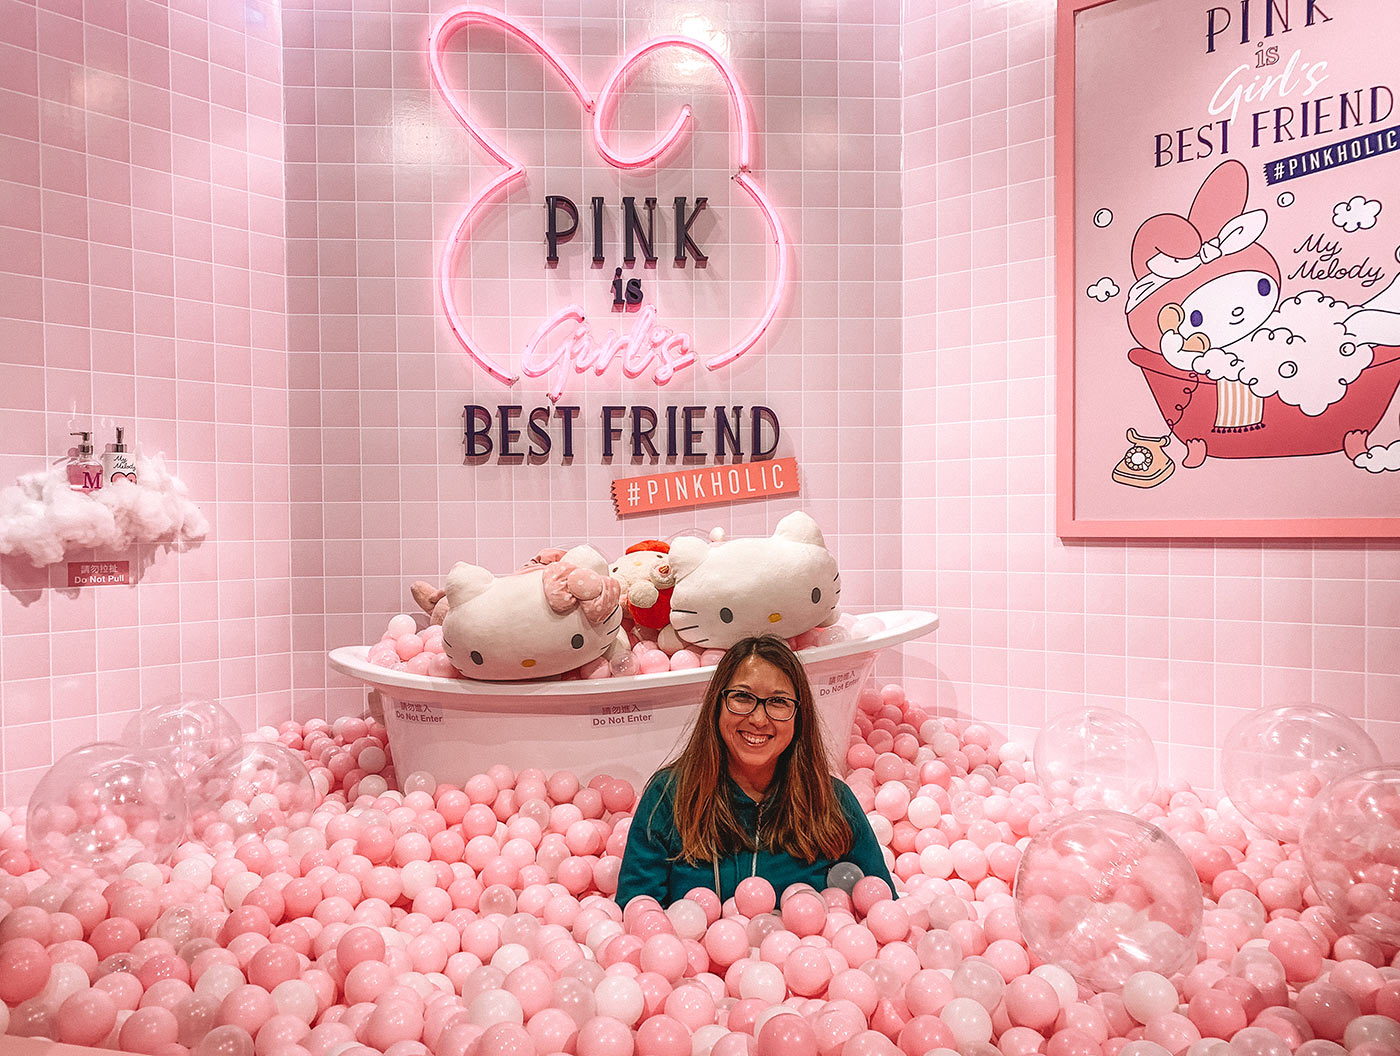 Top things to do in Taipei, Taiwan for first time visitors | blog post | travel guide | Huashan 1914 Creative Park | Hello Kitty